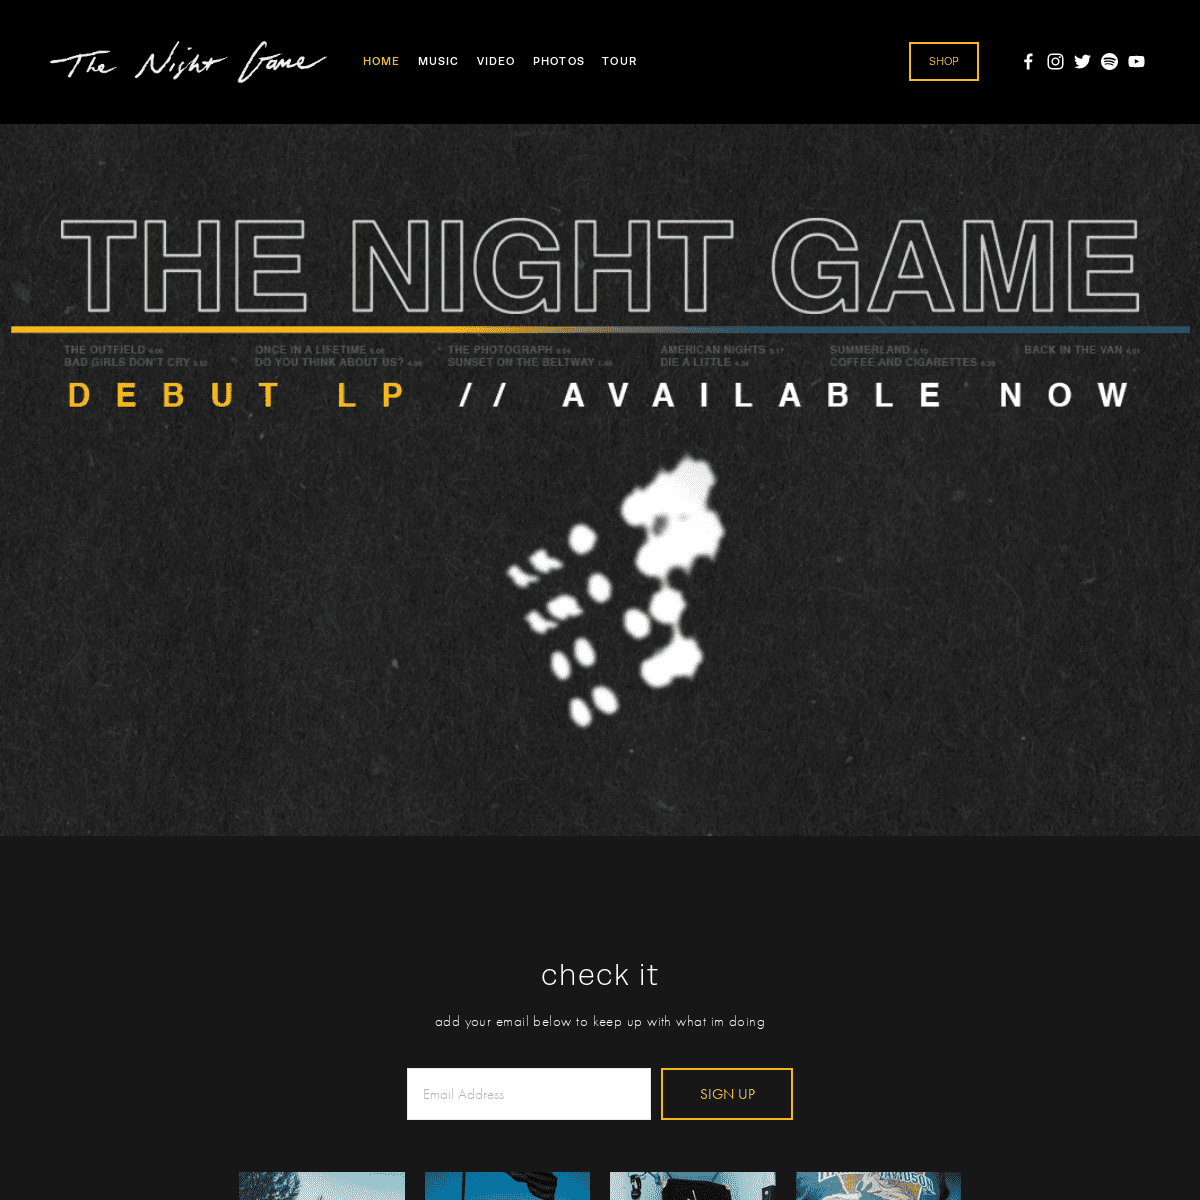 A complete backup of thenightgame.com